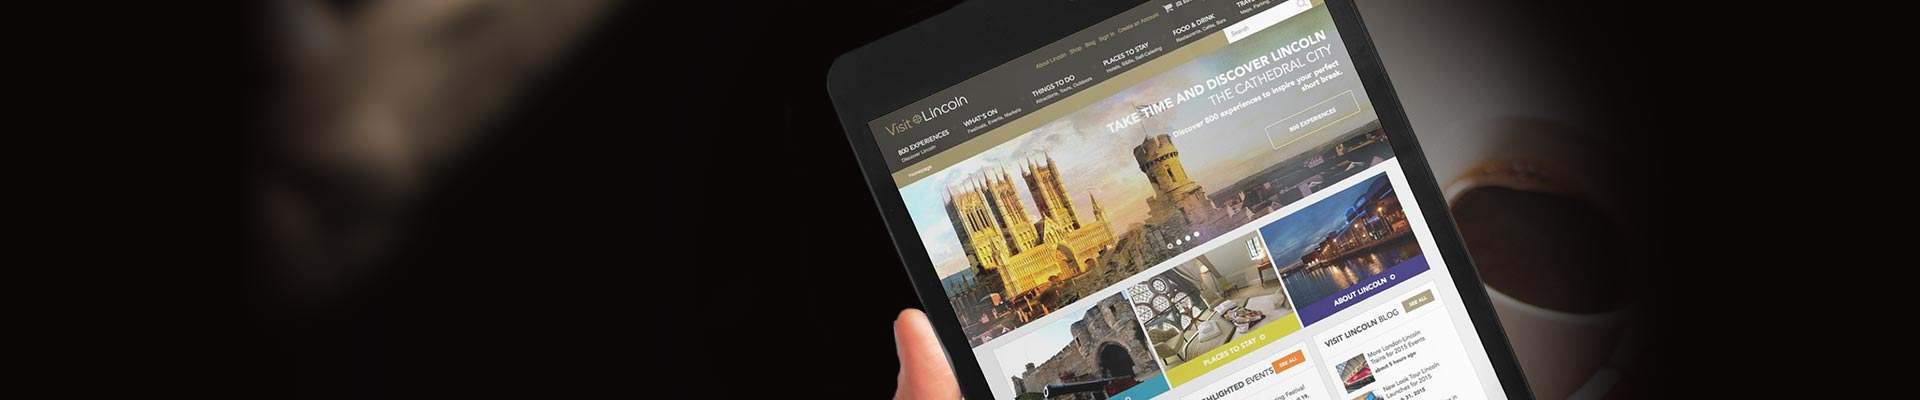 Website design for Lincoln tourism. Discover how we help raise the profile of the historic city of Lincoln